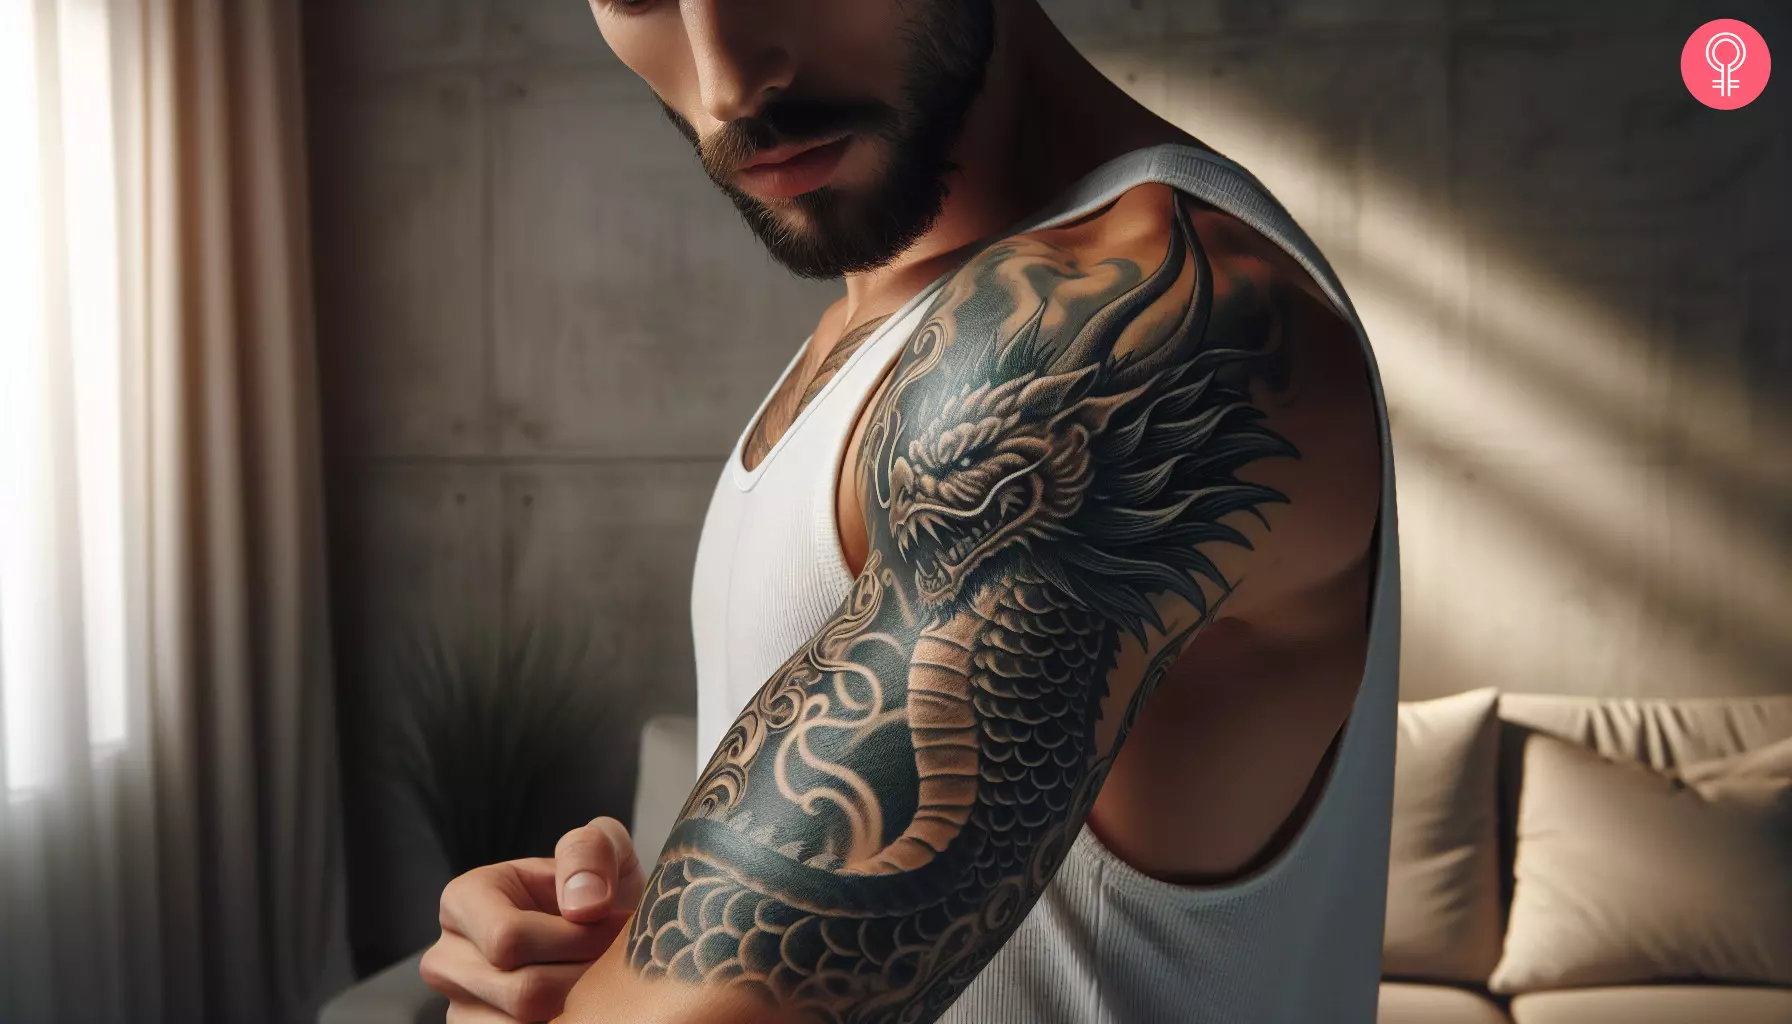 A realistic portrait of a dragon head on the upper arm of a man